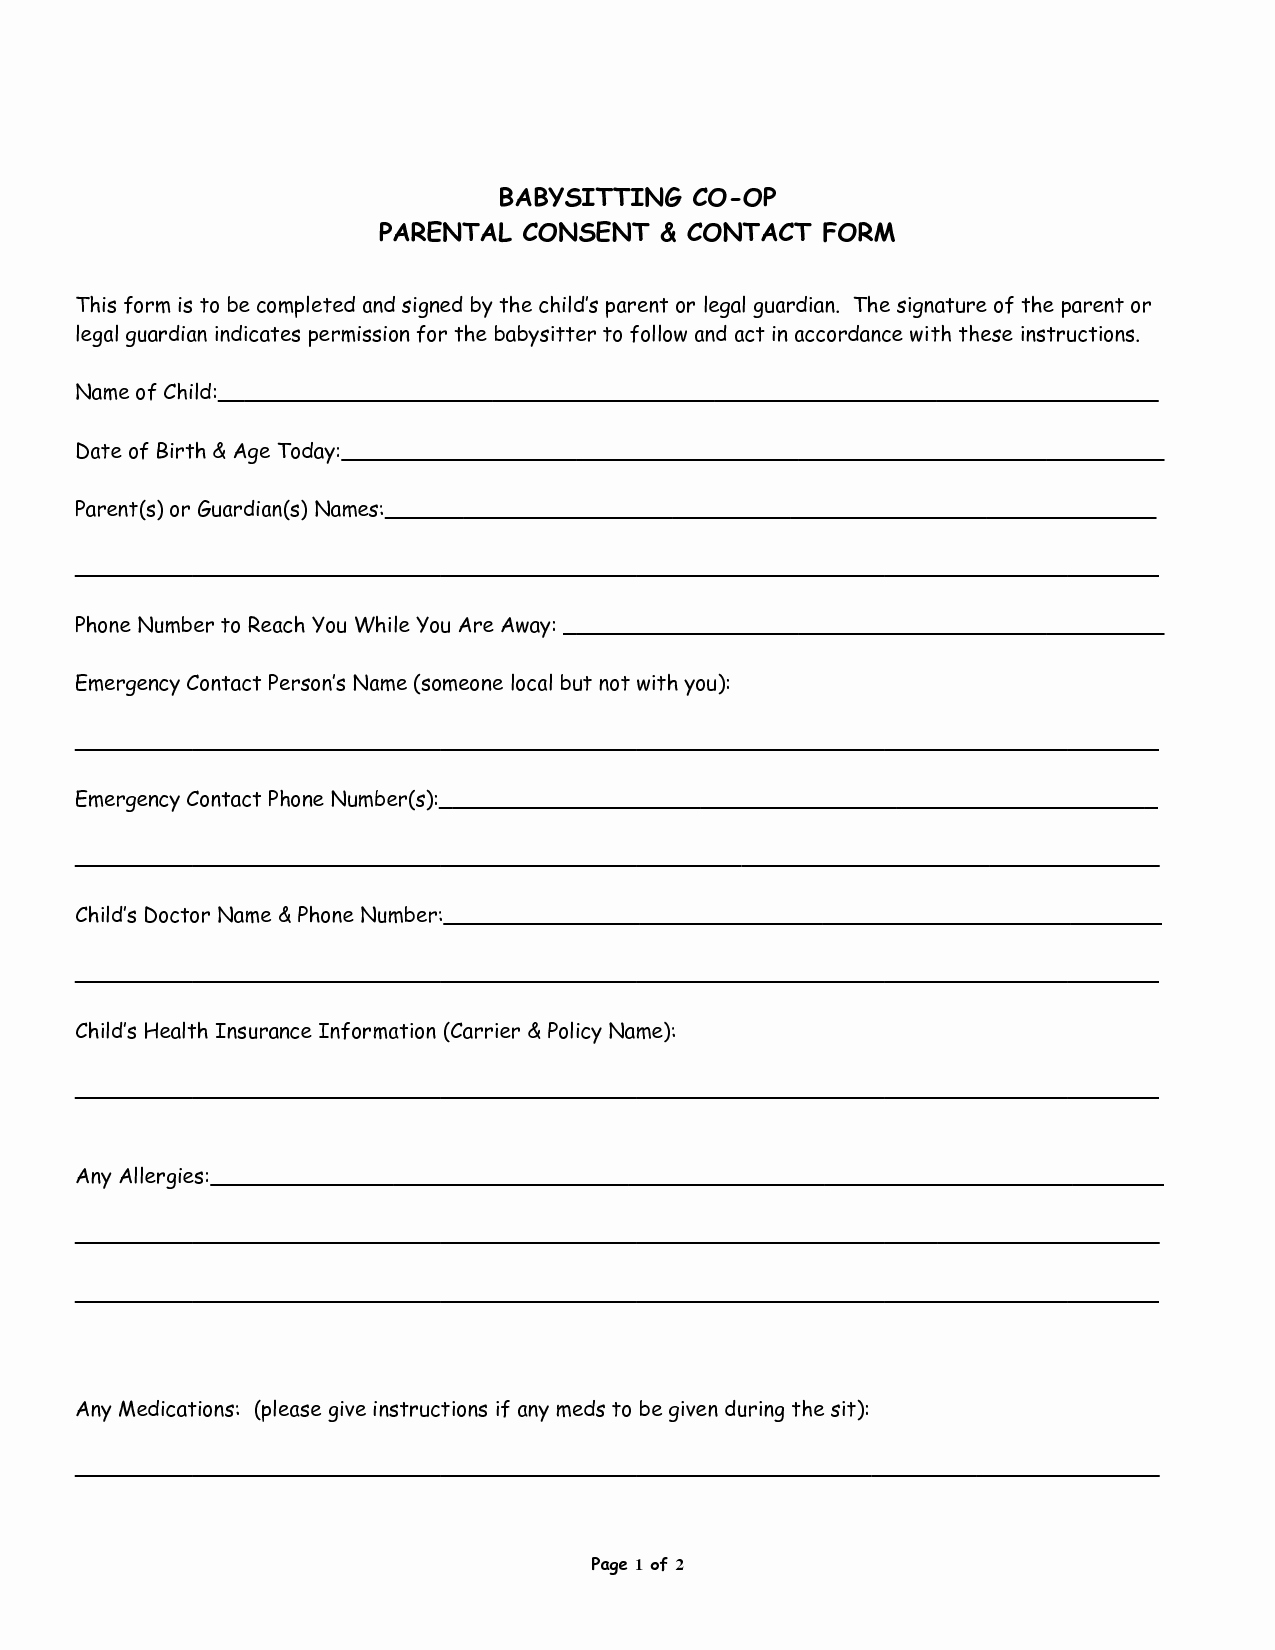 Medical Consent form Template Inspirational Babysitter Medical Consent form Template